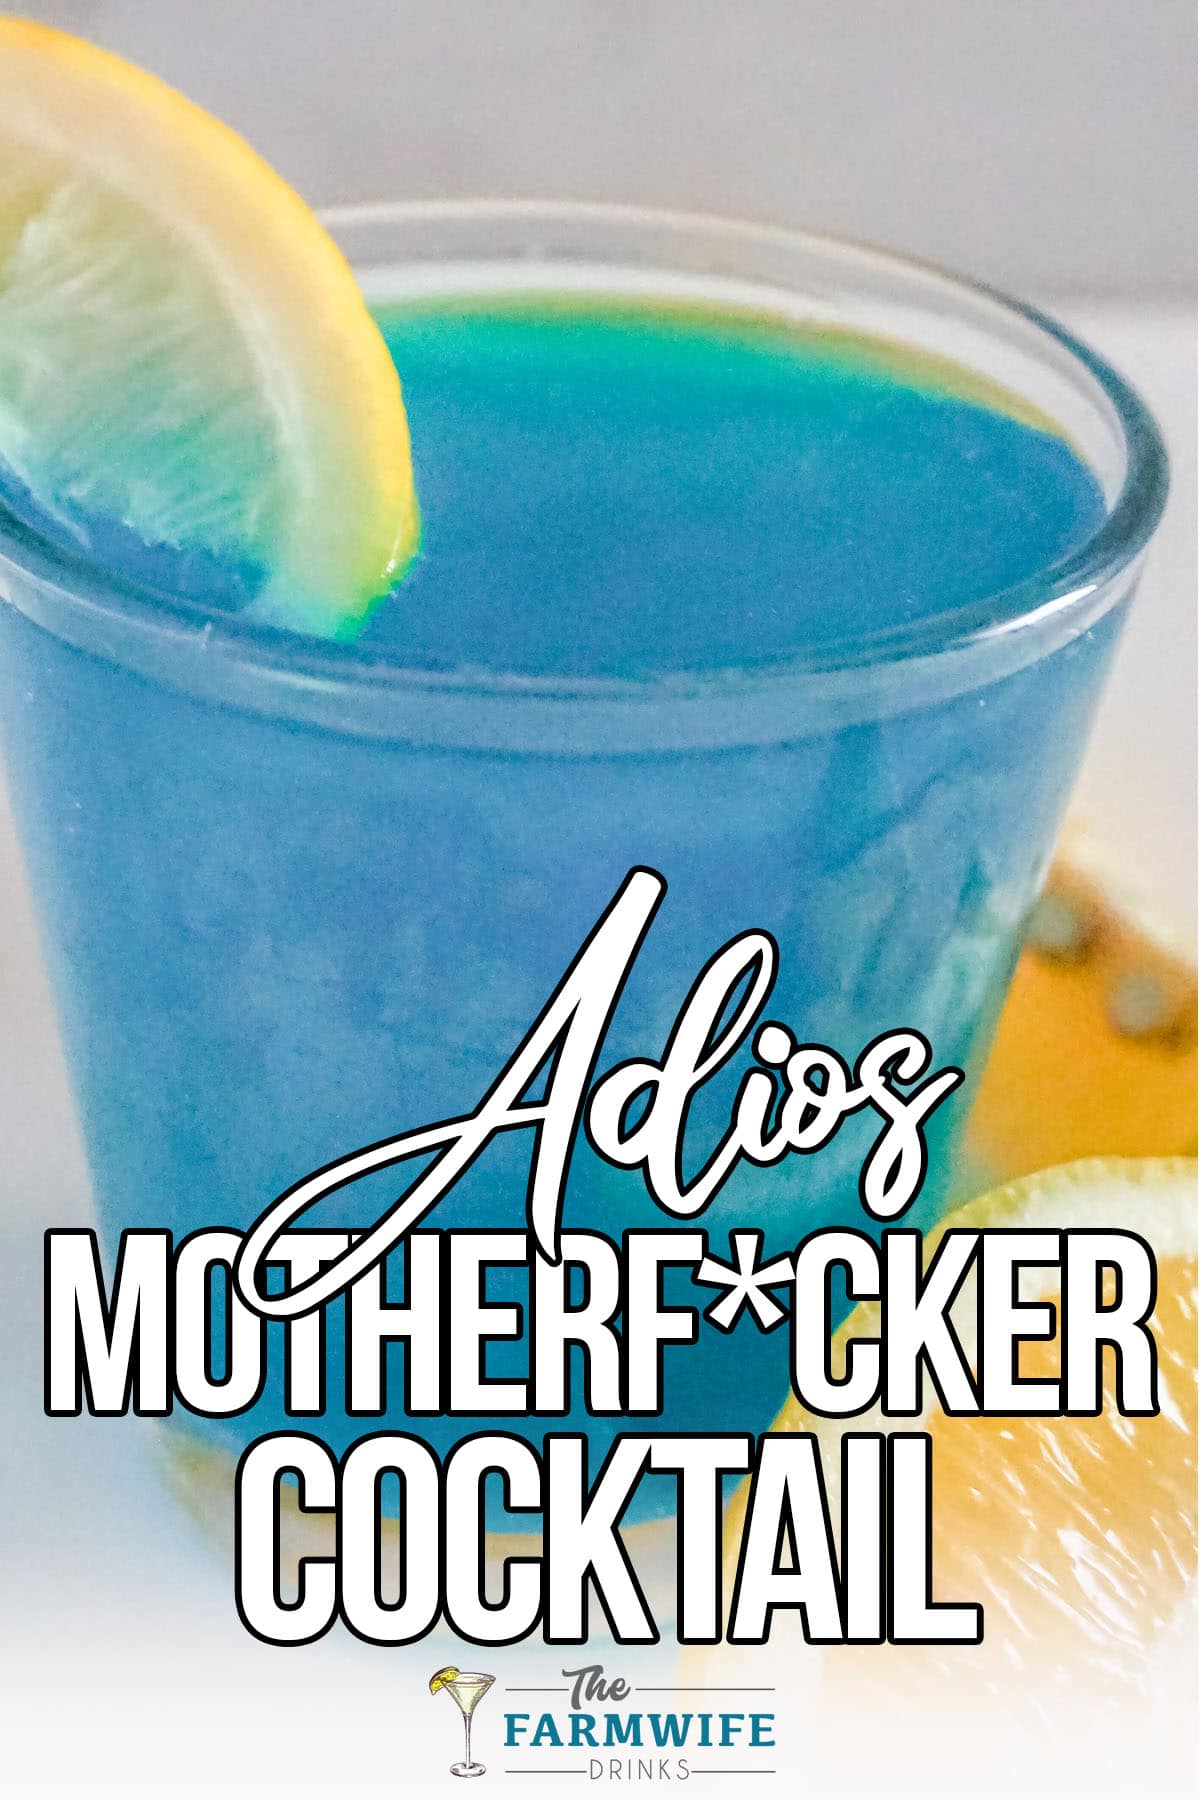 closeup of blue cocktail with text which reads Adios Motherfucker cocktail